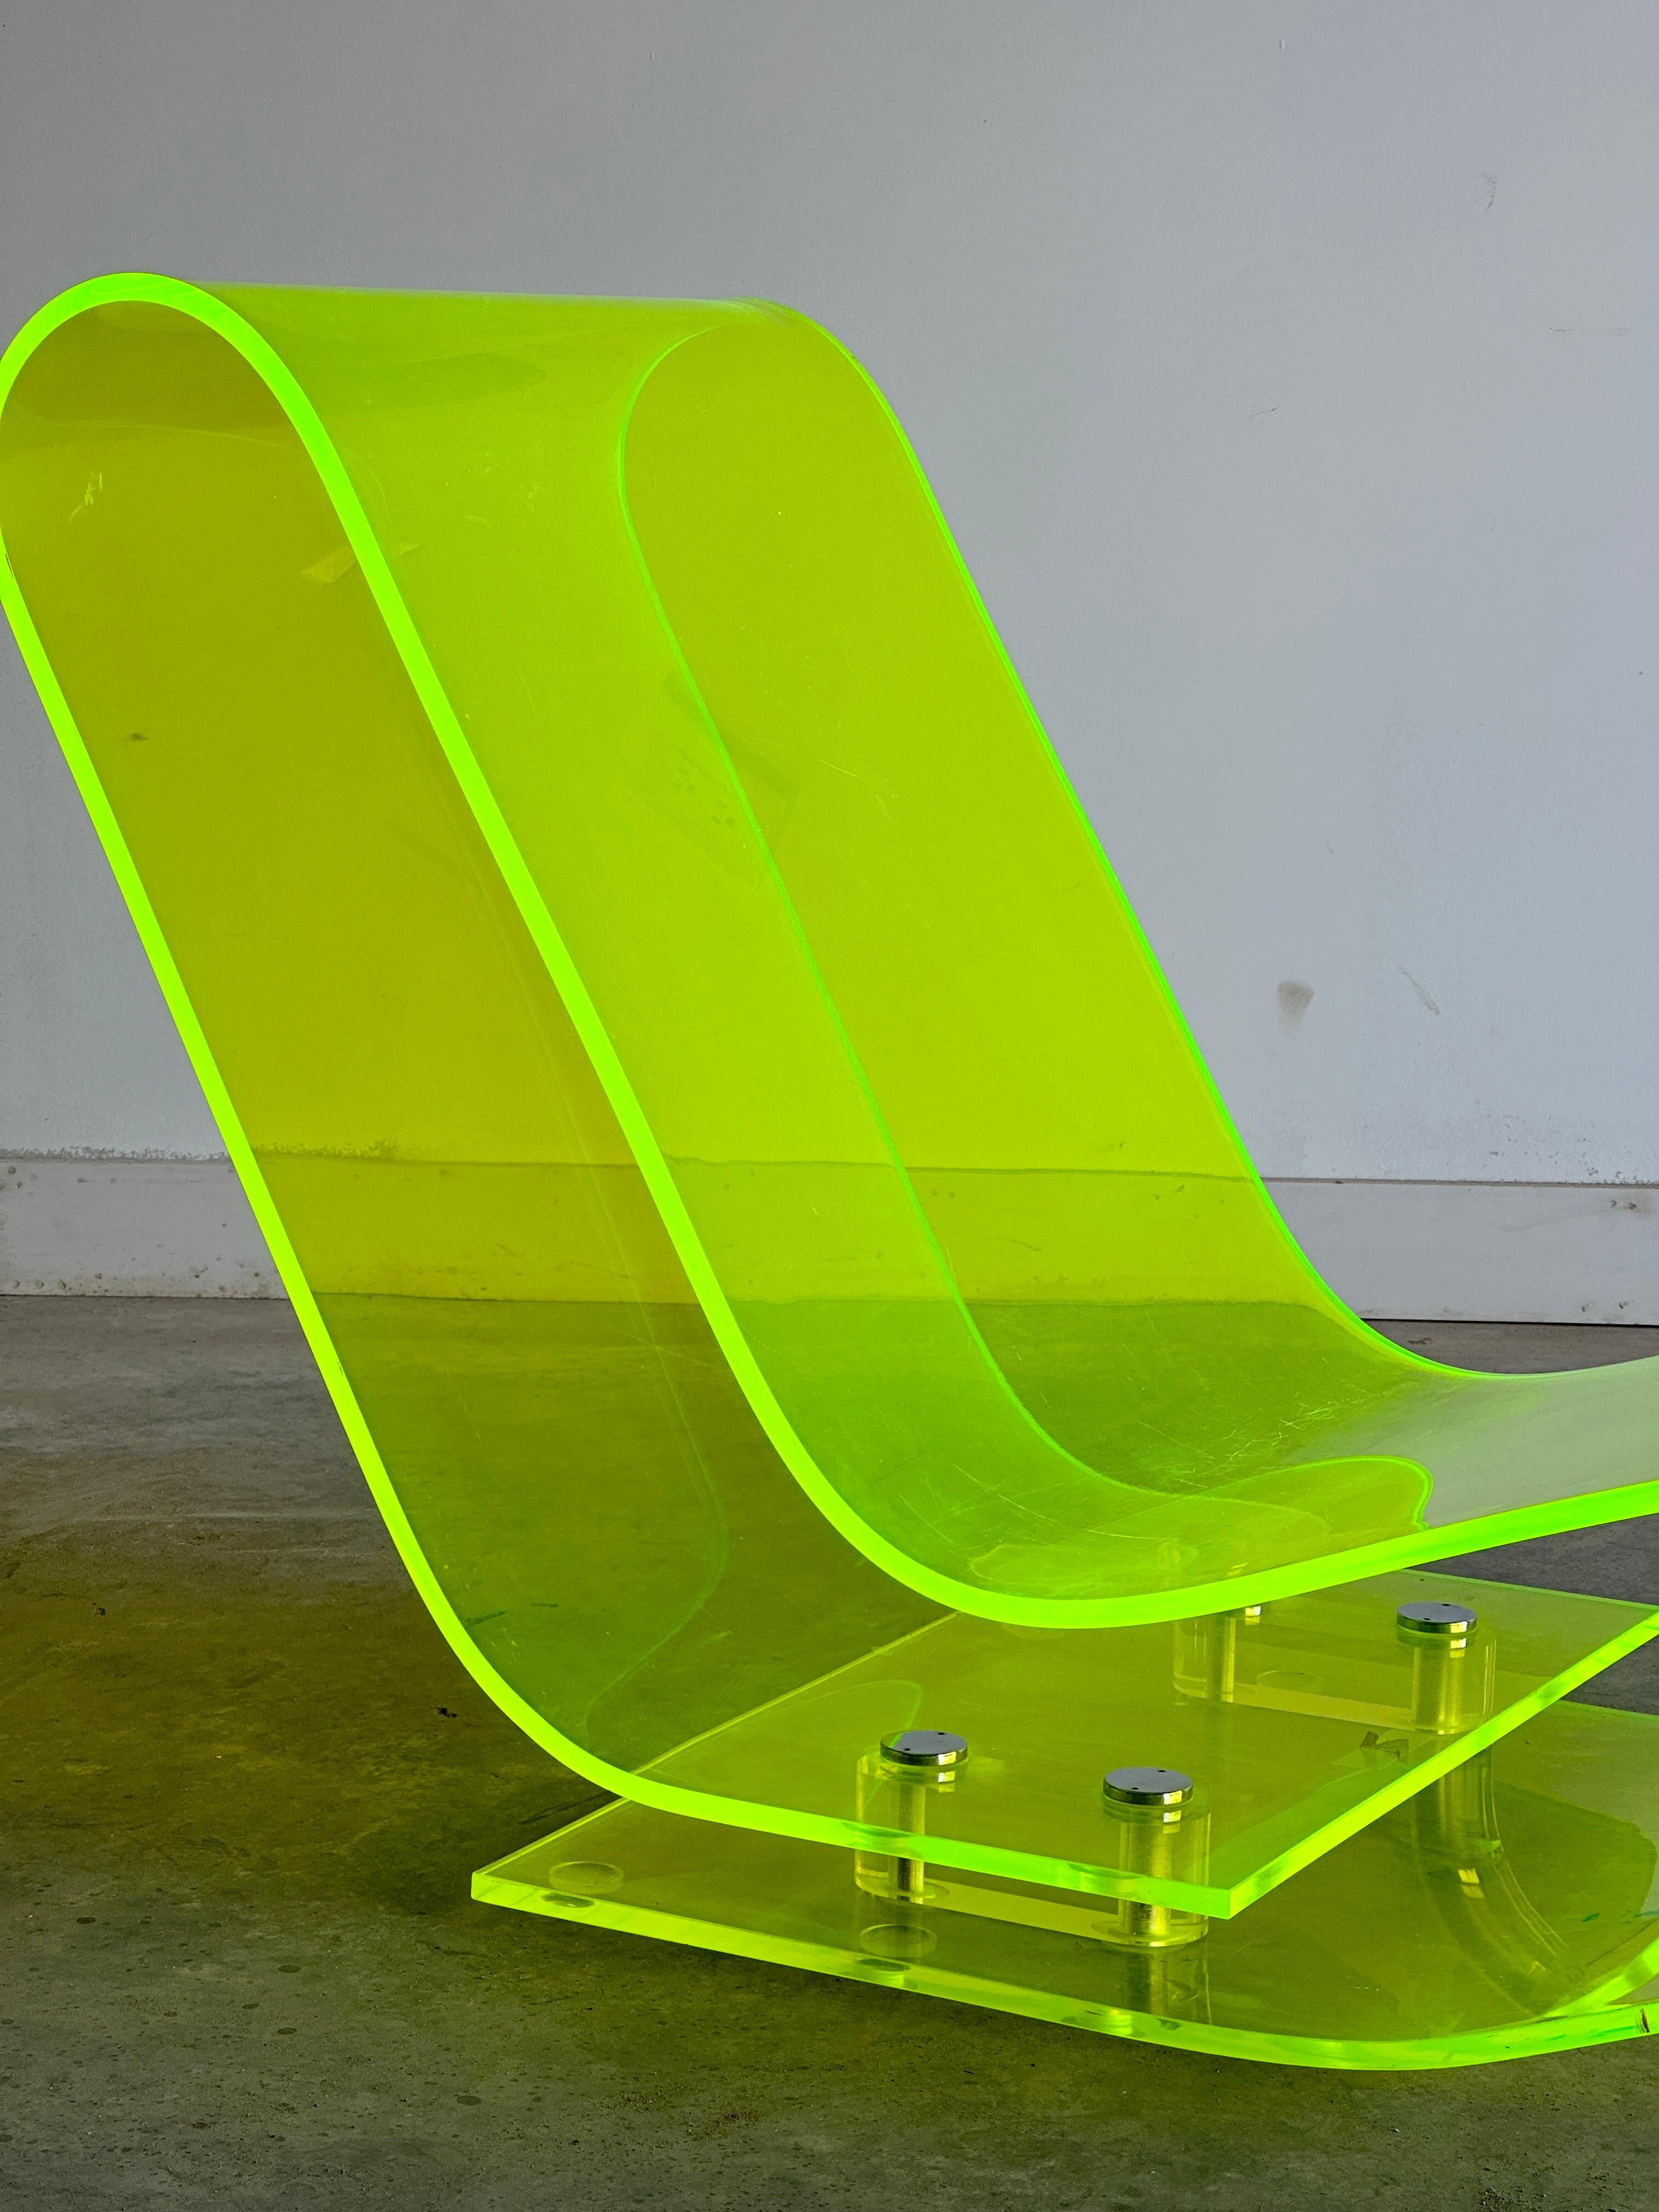 This electric green Model 6040 chair by Maarten van Severen is a stunning piece of modern design that combines functionality and aesthetics. It is made of a single sheet of transparent methacrylate that bends around itself to create an incredibly